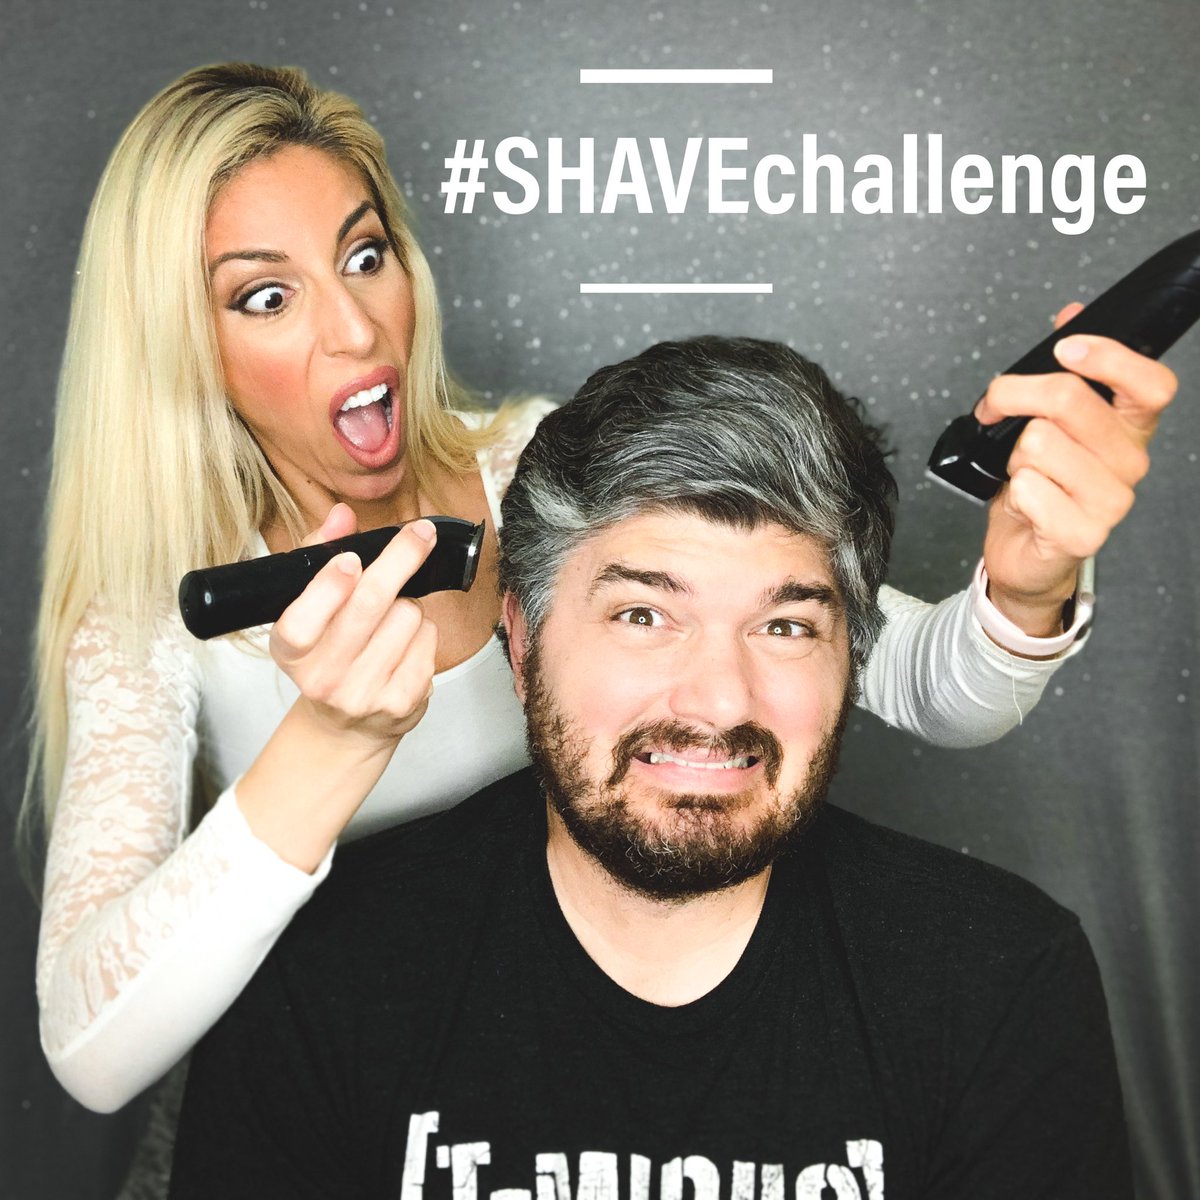 Join our #ShaveChallenge to raise money for our kids & families of the @WattsRams to help them through these difficult times. Please Share! Donate, Shave. Let’s bring some love into #Watts 🥰❤️🙌🏼 Click DONATE at TheWattsRams.com youtu.be/t6tJ2jt3-wk